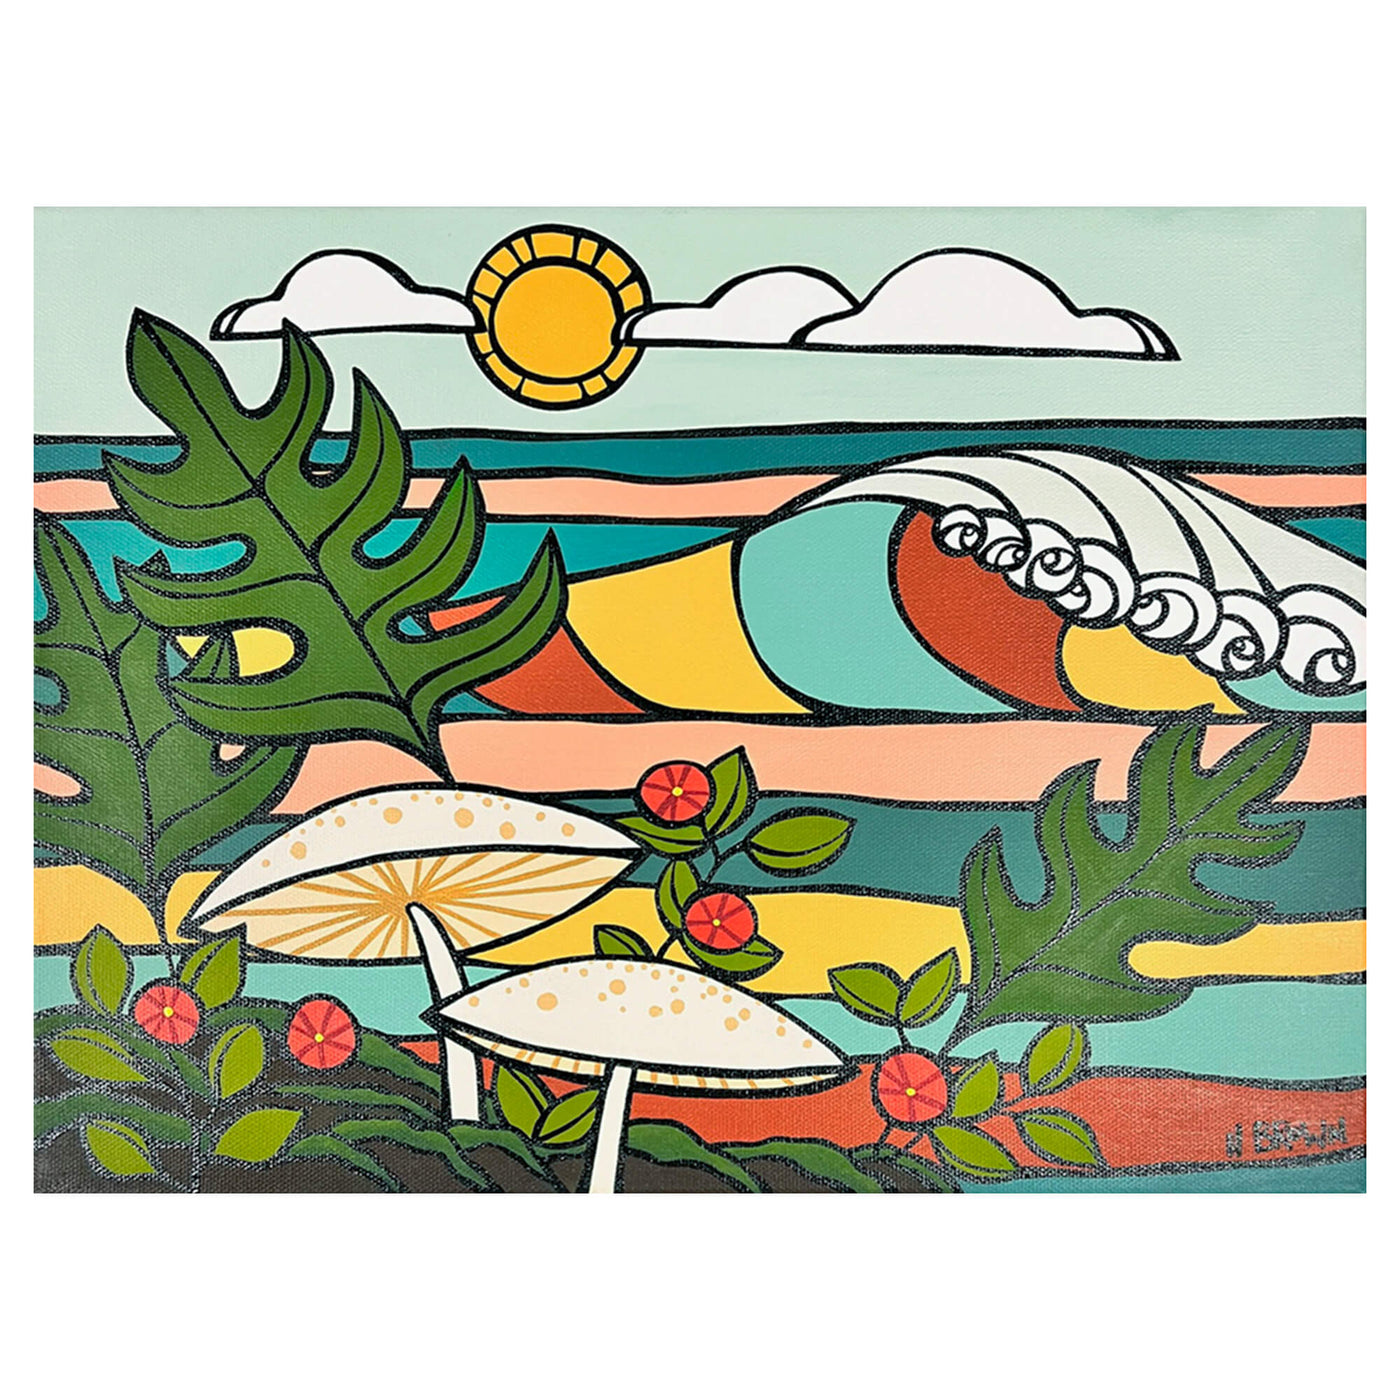 An acrylic painting on canvas featuring a fall color-inspired artwork with a gigantic rolling wave, mushrooms, and some tropical plants by Hawaii surf artist Heather Brown